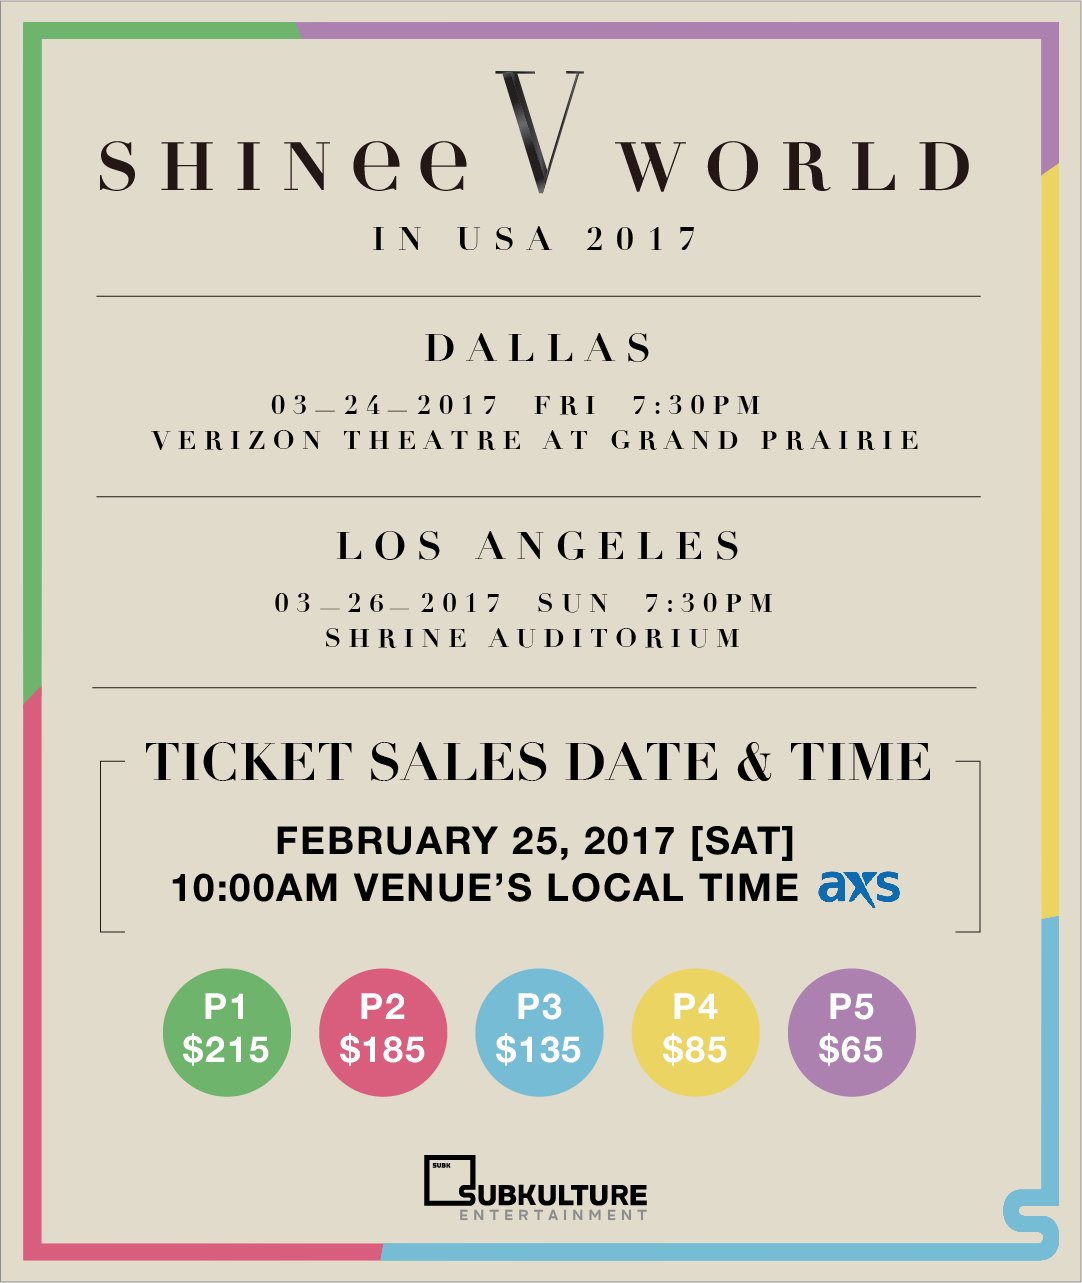 Subkulture Entertainment Shinee World V In Usa 17 Prices Ticket Sales Date Ticket Links Seating Charts Will Be Posted In The Coming Weeks Shineeworldinusa T Co ufl0frjl Twitter